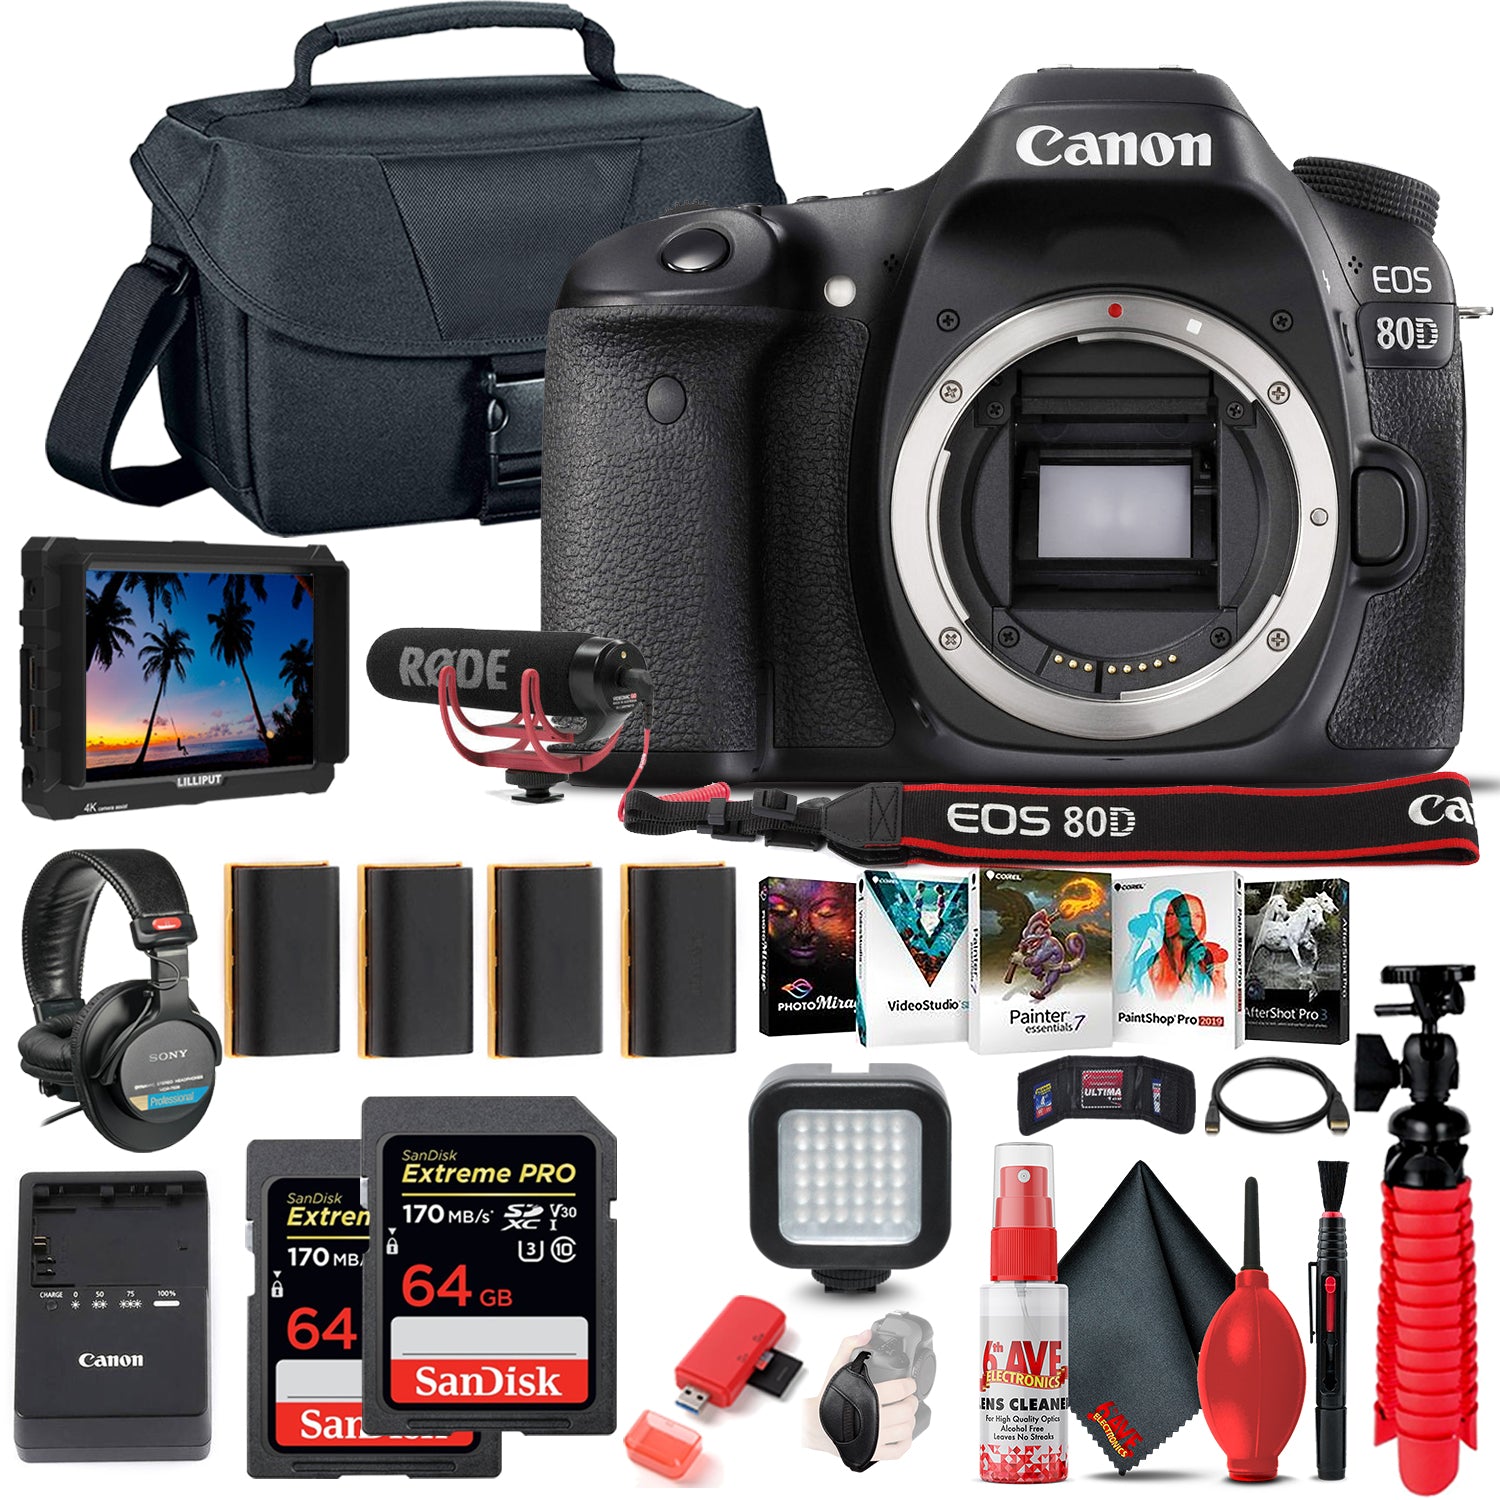 Canon EOS 80D DSLR Camera (Body Only) (1263C004) + 4K Monitor + Mic + More